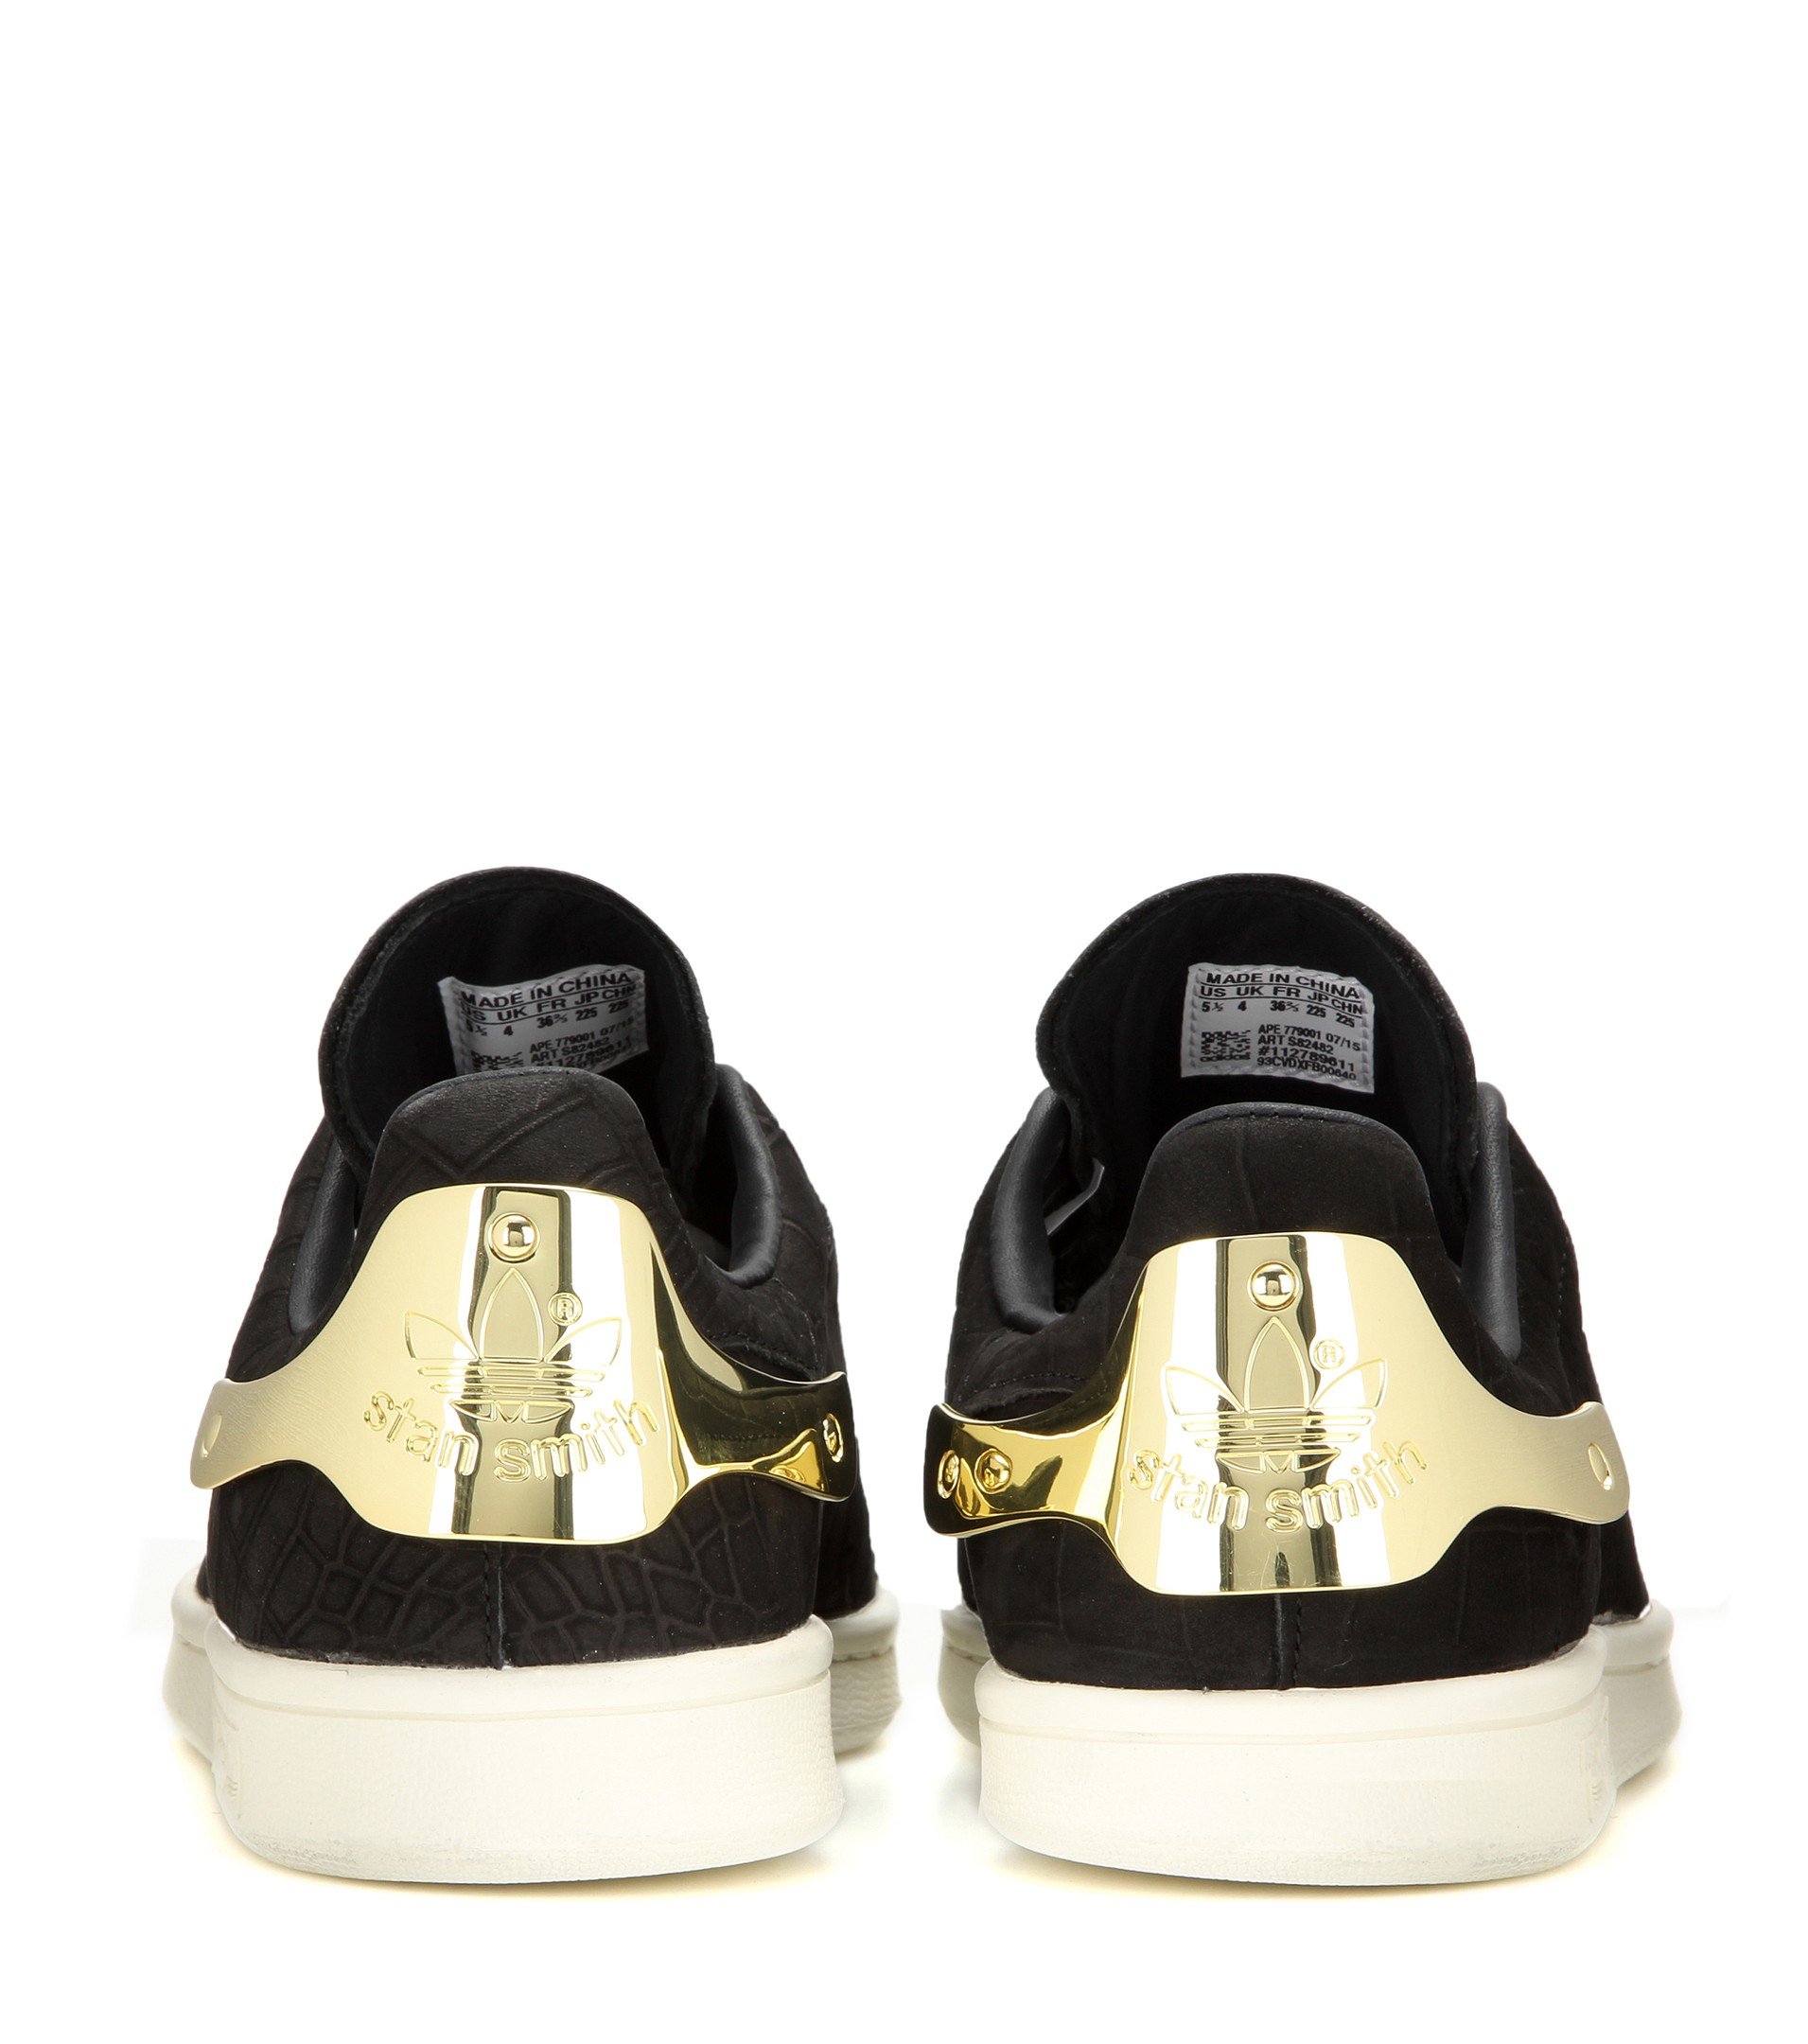 adidas shoes with gold plate